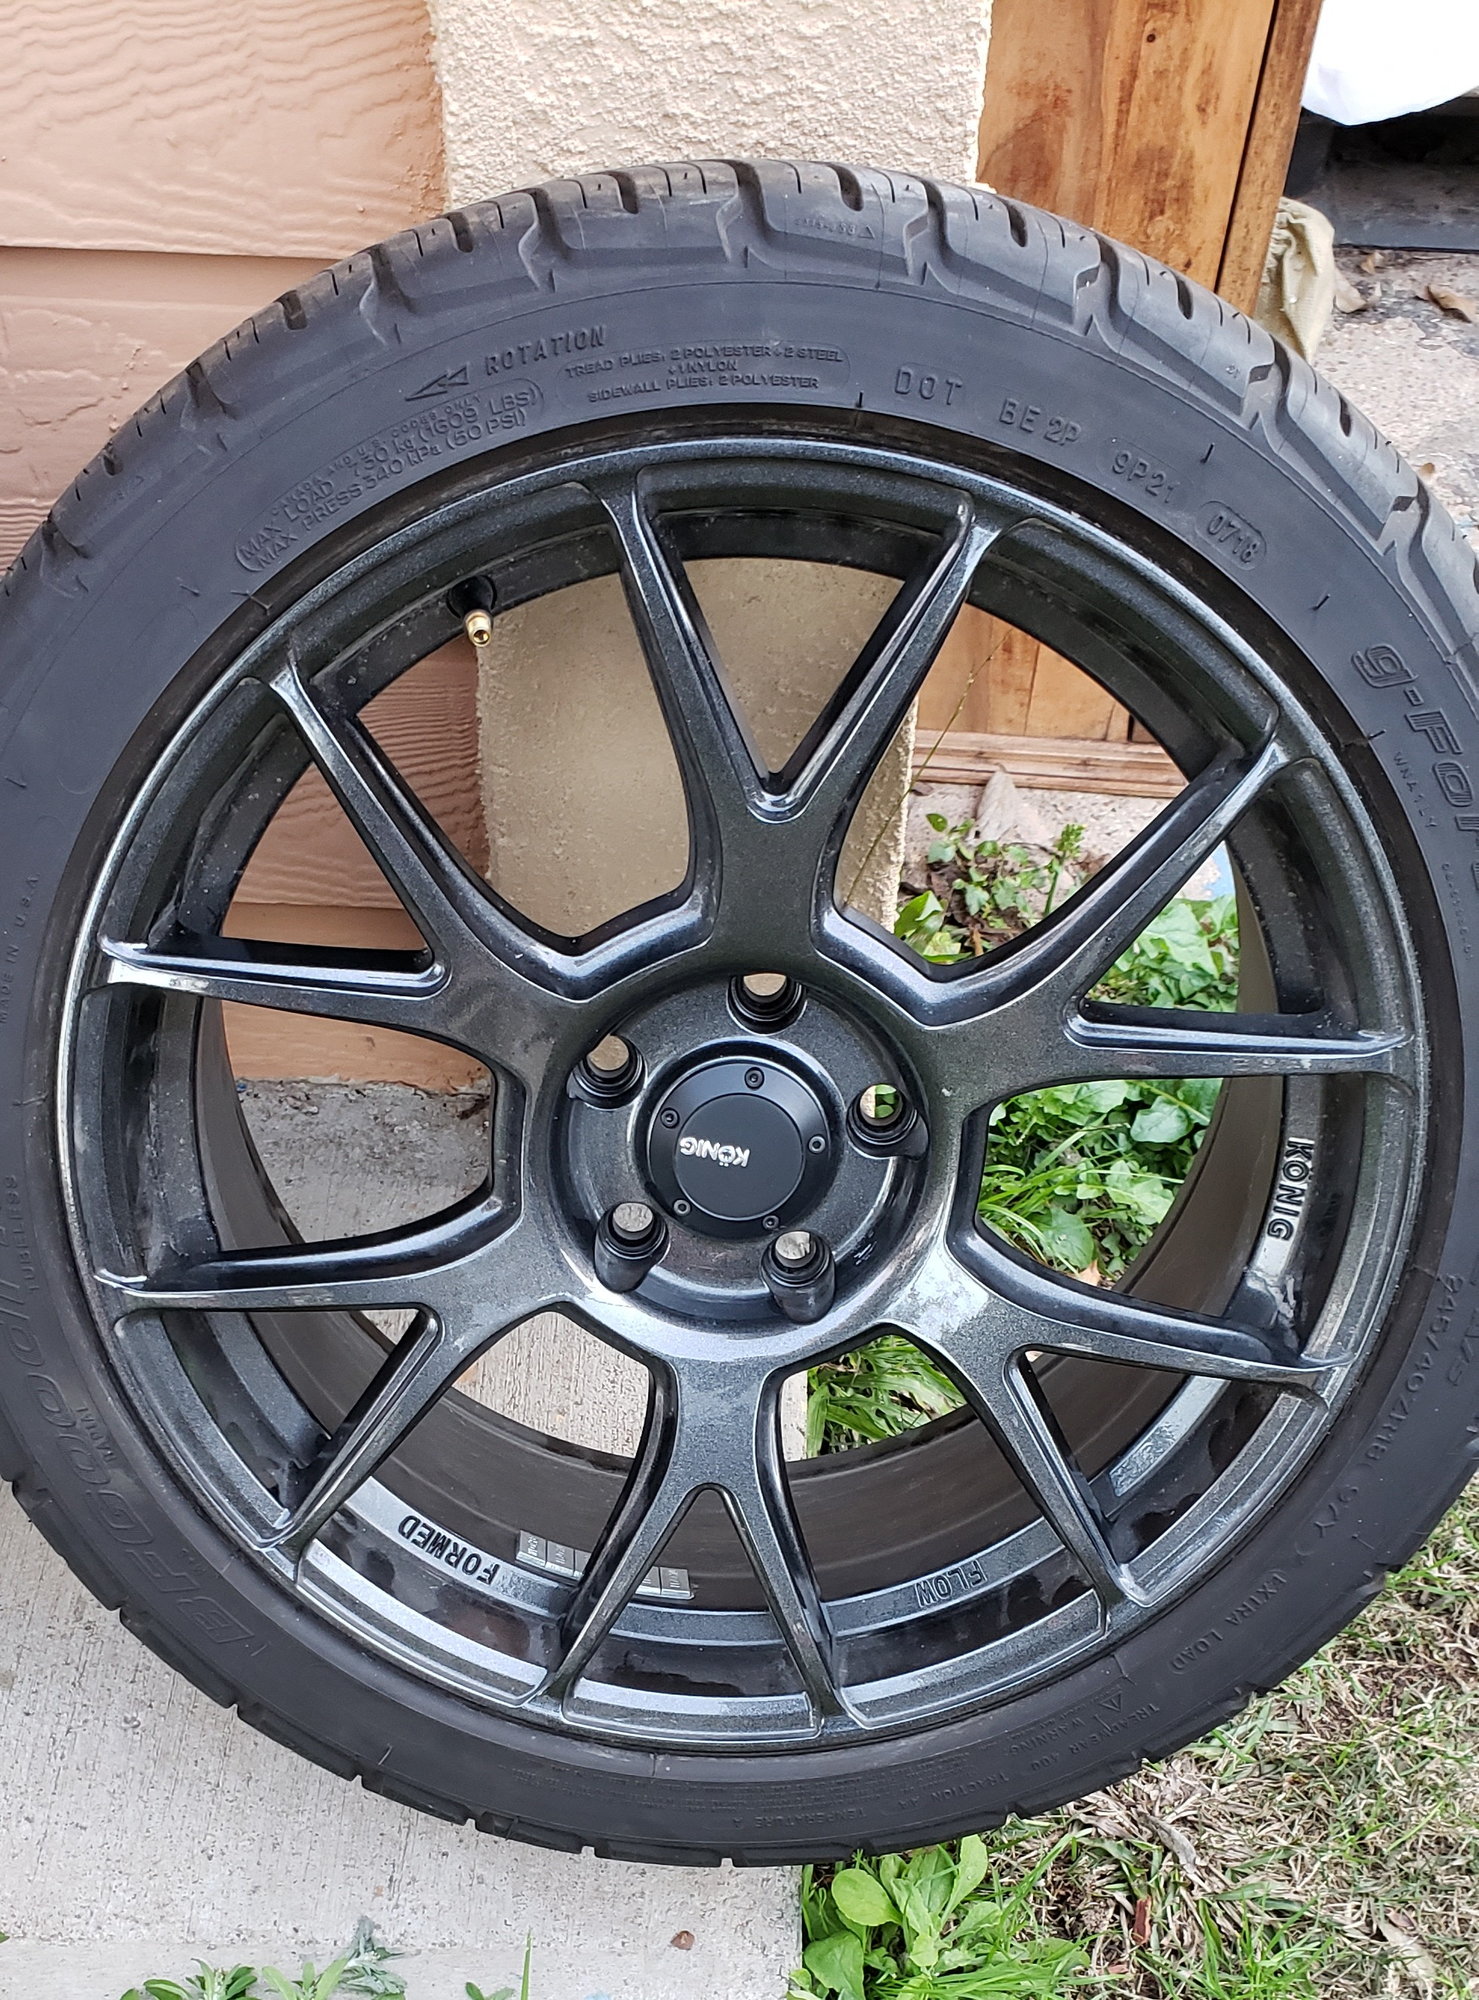 2008 Acura TL - Konig Ampliform Wheels and BFG G-Force Comp2 Tires - Wheels and Tires/Axles - $1,240 - Houston, TX 77584, United States